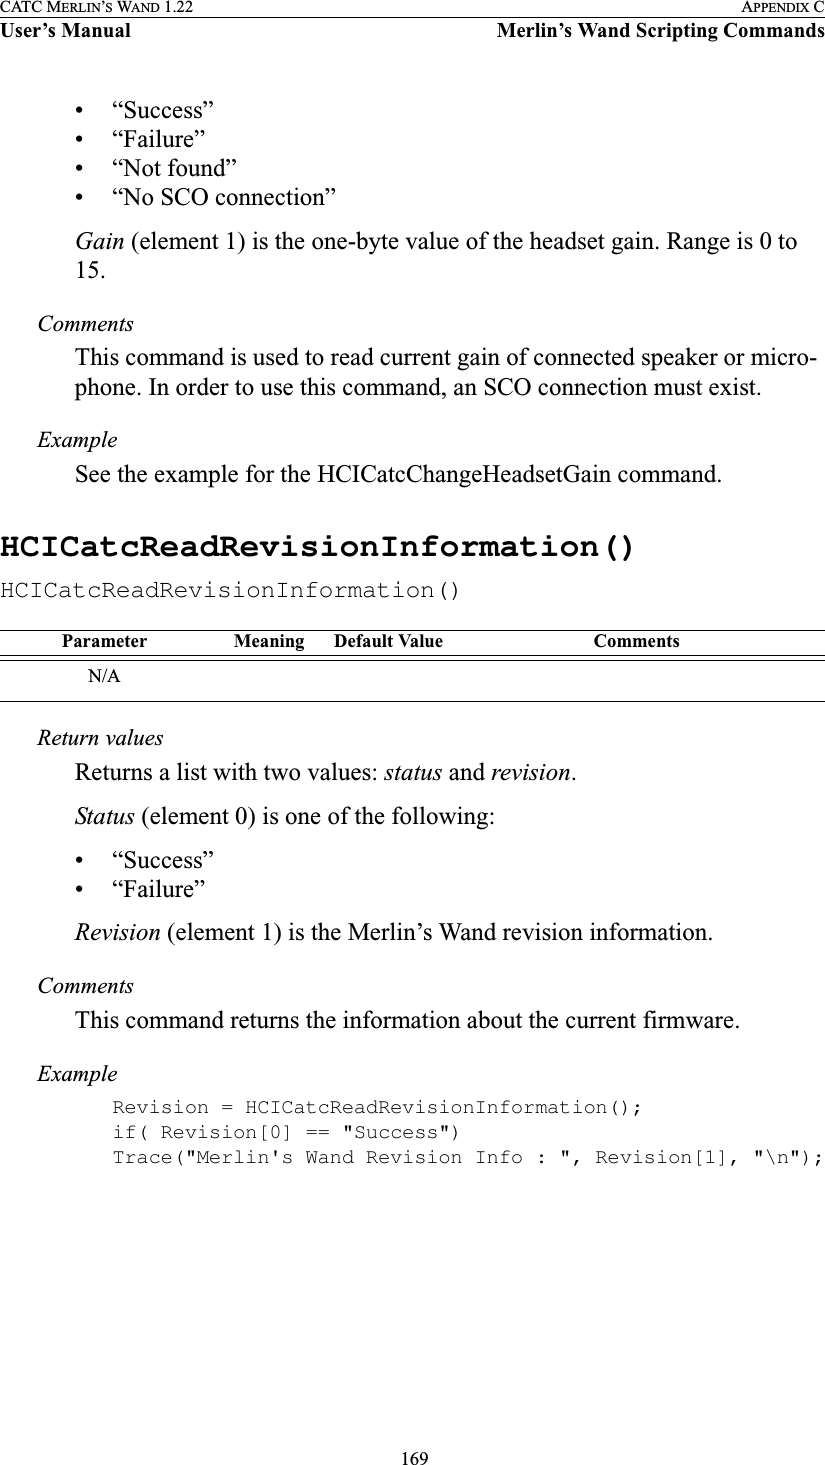  169CATC MERLIN’S WAND 1.22 APPENDIX CUser’s Manual Merlin’s Wand Scripting Commands• “Success”• “Failure”• “Not found”• “No SCO connection”Gain (element 1) is the one-byte value of the headset gain. Range is 0 to 15.CommentsThis command is used to read current gain of connected speaker or micro-phone. In order to use this command, an SCO connection must exist.ExampleSee the example for the HCICatcChangeHeadsetGain command.HCICatcReadRevisionInformation()HCICatcReadRevisionInformation()Return valuesReturns a list with two values: status and revision.Status (element 0) is one of the following:• “Success”• “Failure”Revision (element 1) is the Merlin’s Wand revision information.CommentsThis command returns the information about the current firmware.ExampleRevision = HCICatcReadRevisionInformation();if( Revision[0] == &quot;Success&quot;)Trace(&quot;Merlin&apos;s Wand Revision Info : &quot;, Revision[1], &quot;\n&quot;);Parameter Meaning Default Value CommentsN/A